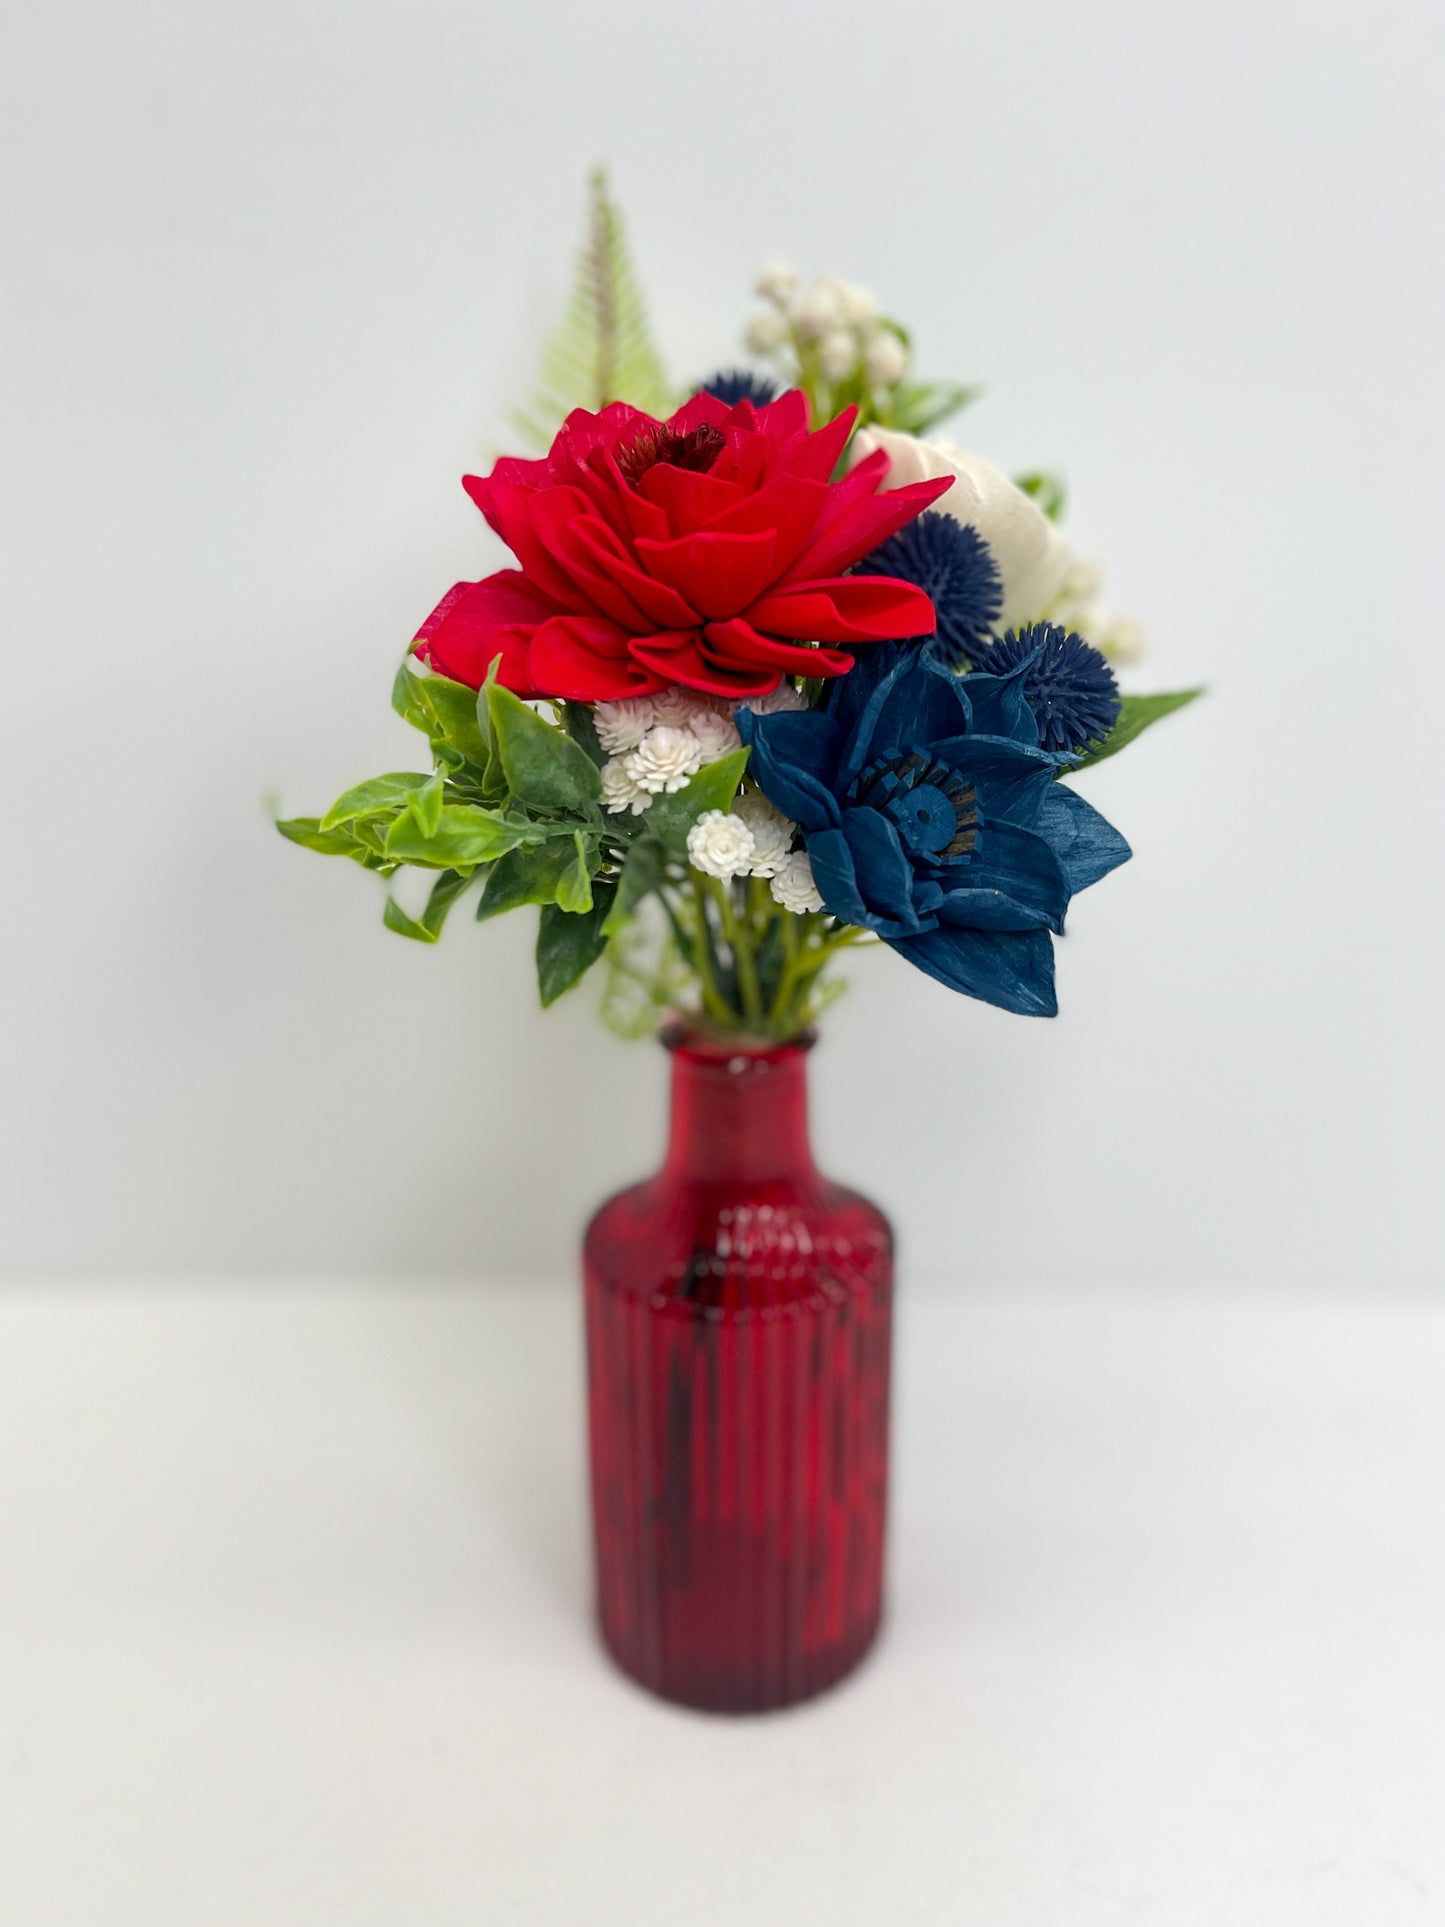 USA Trio Bouquet in Red Bud Vase